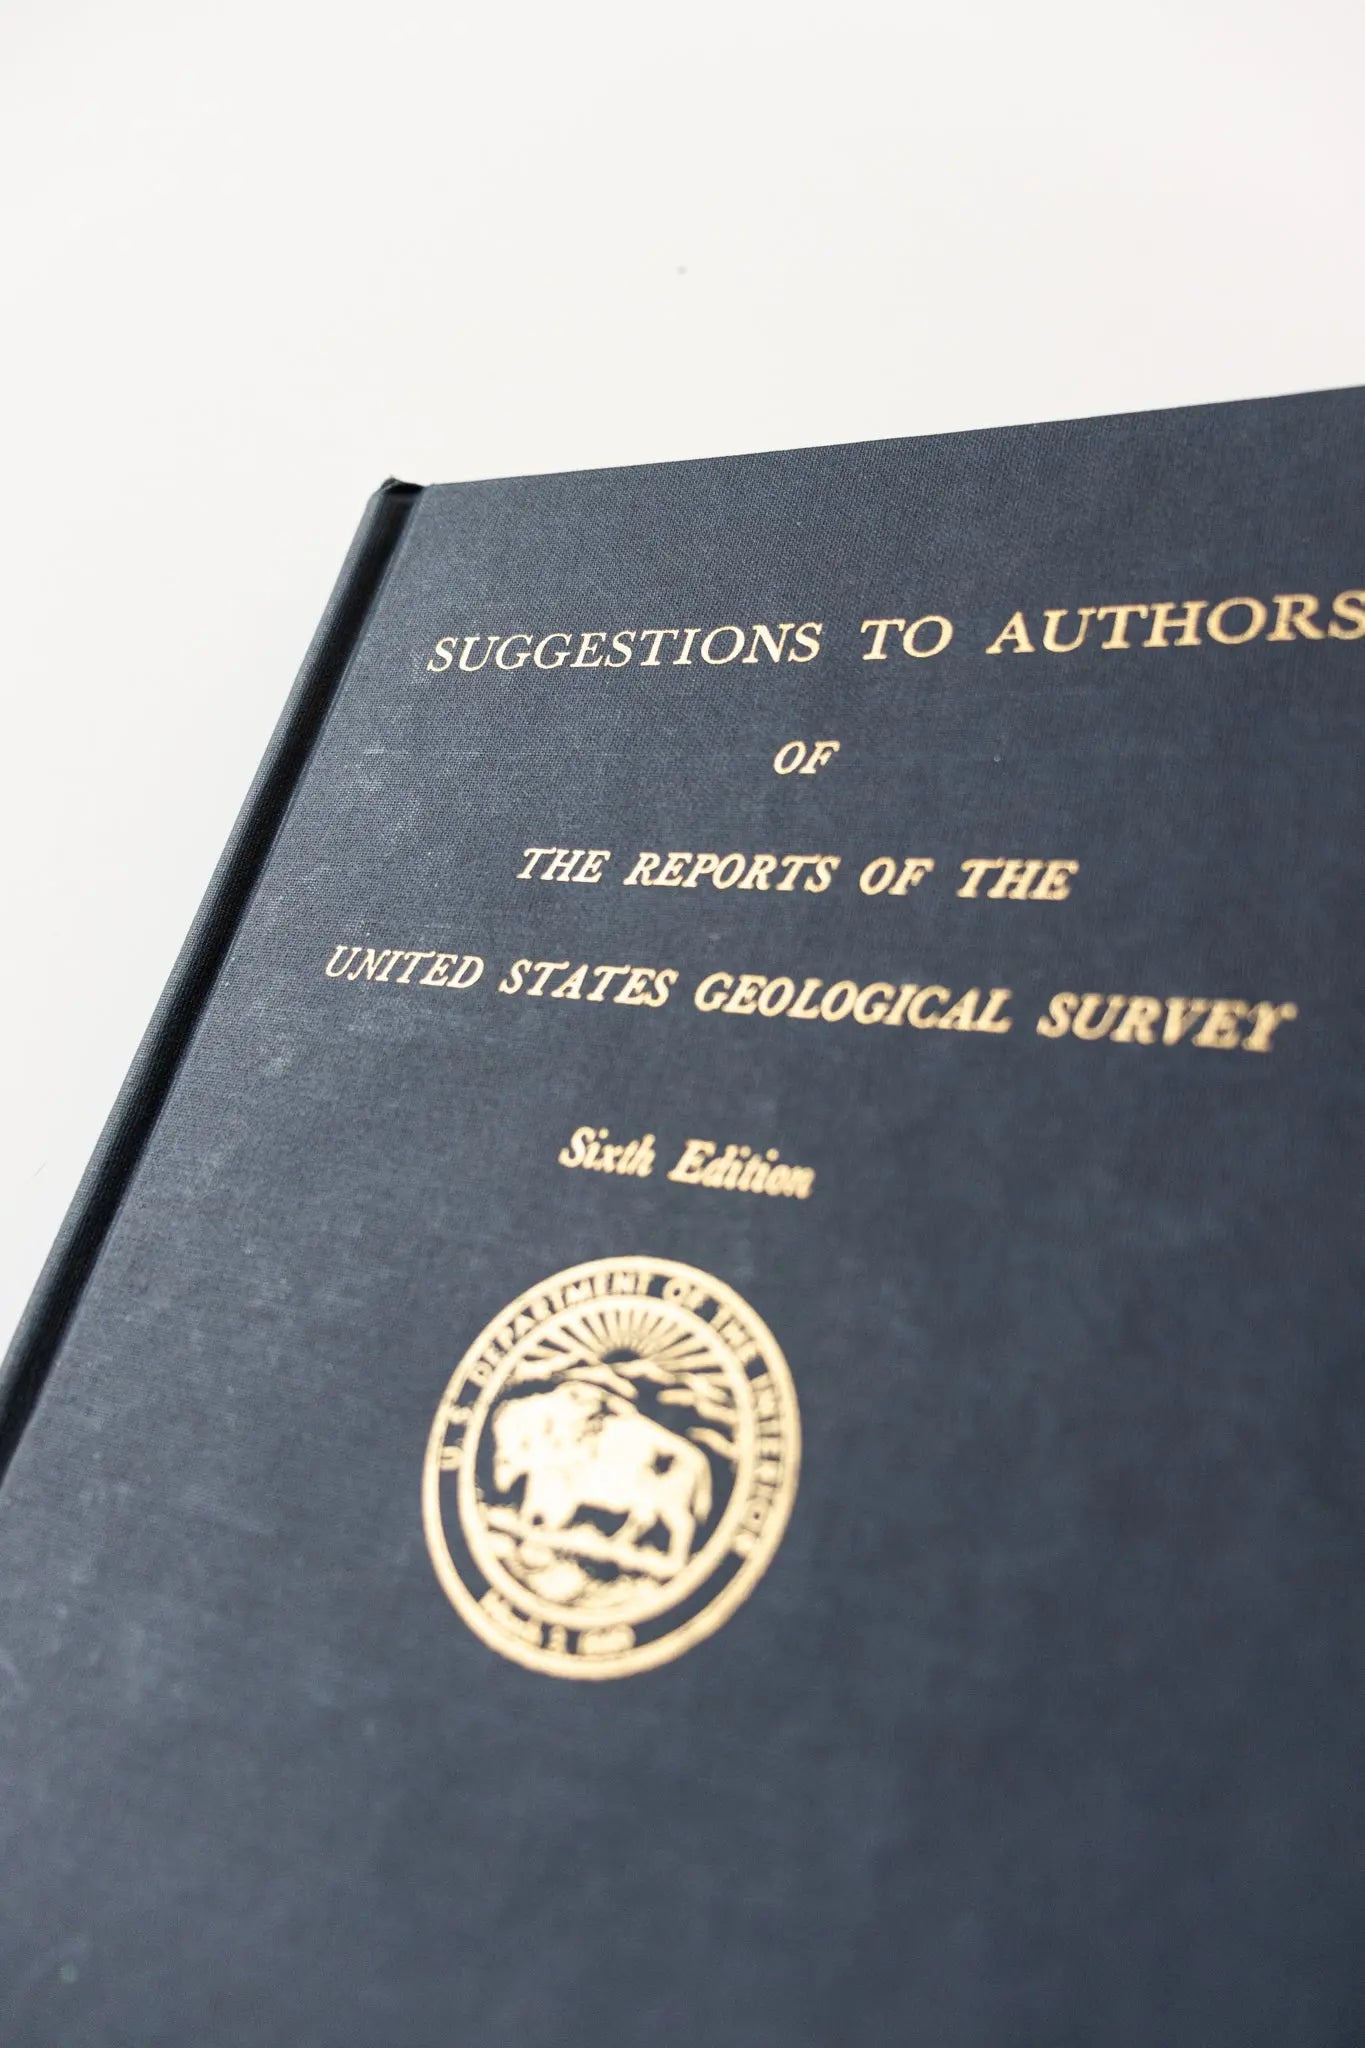 Suggestions to Authors: Of the Reports of the United States Geological Survey - Stemcell Science Shop